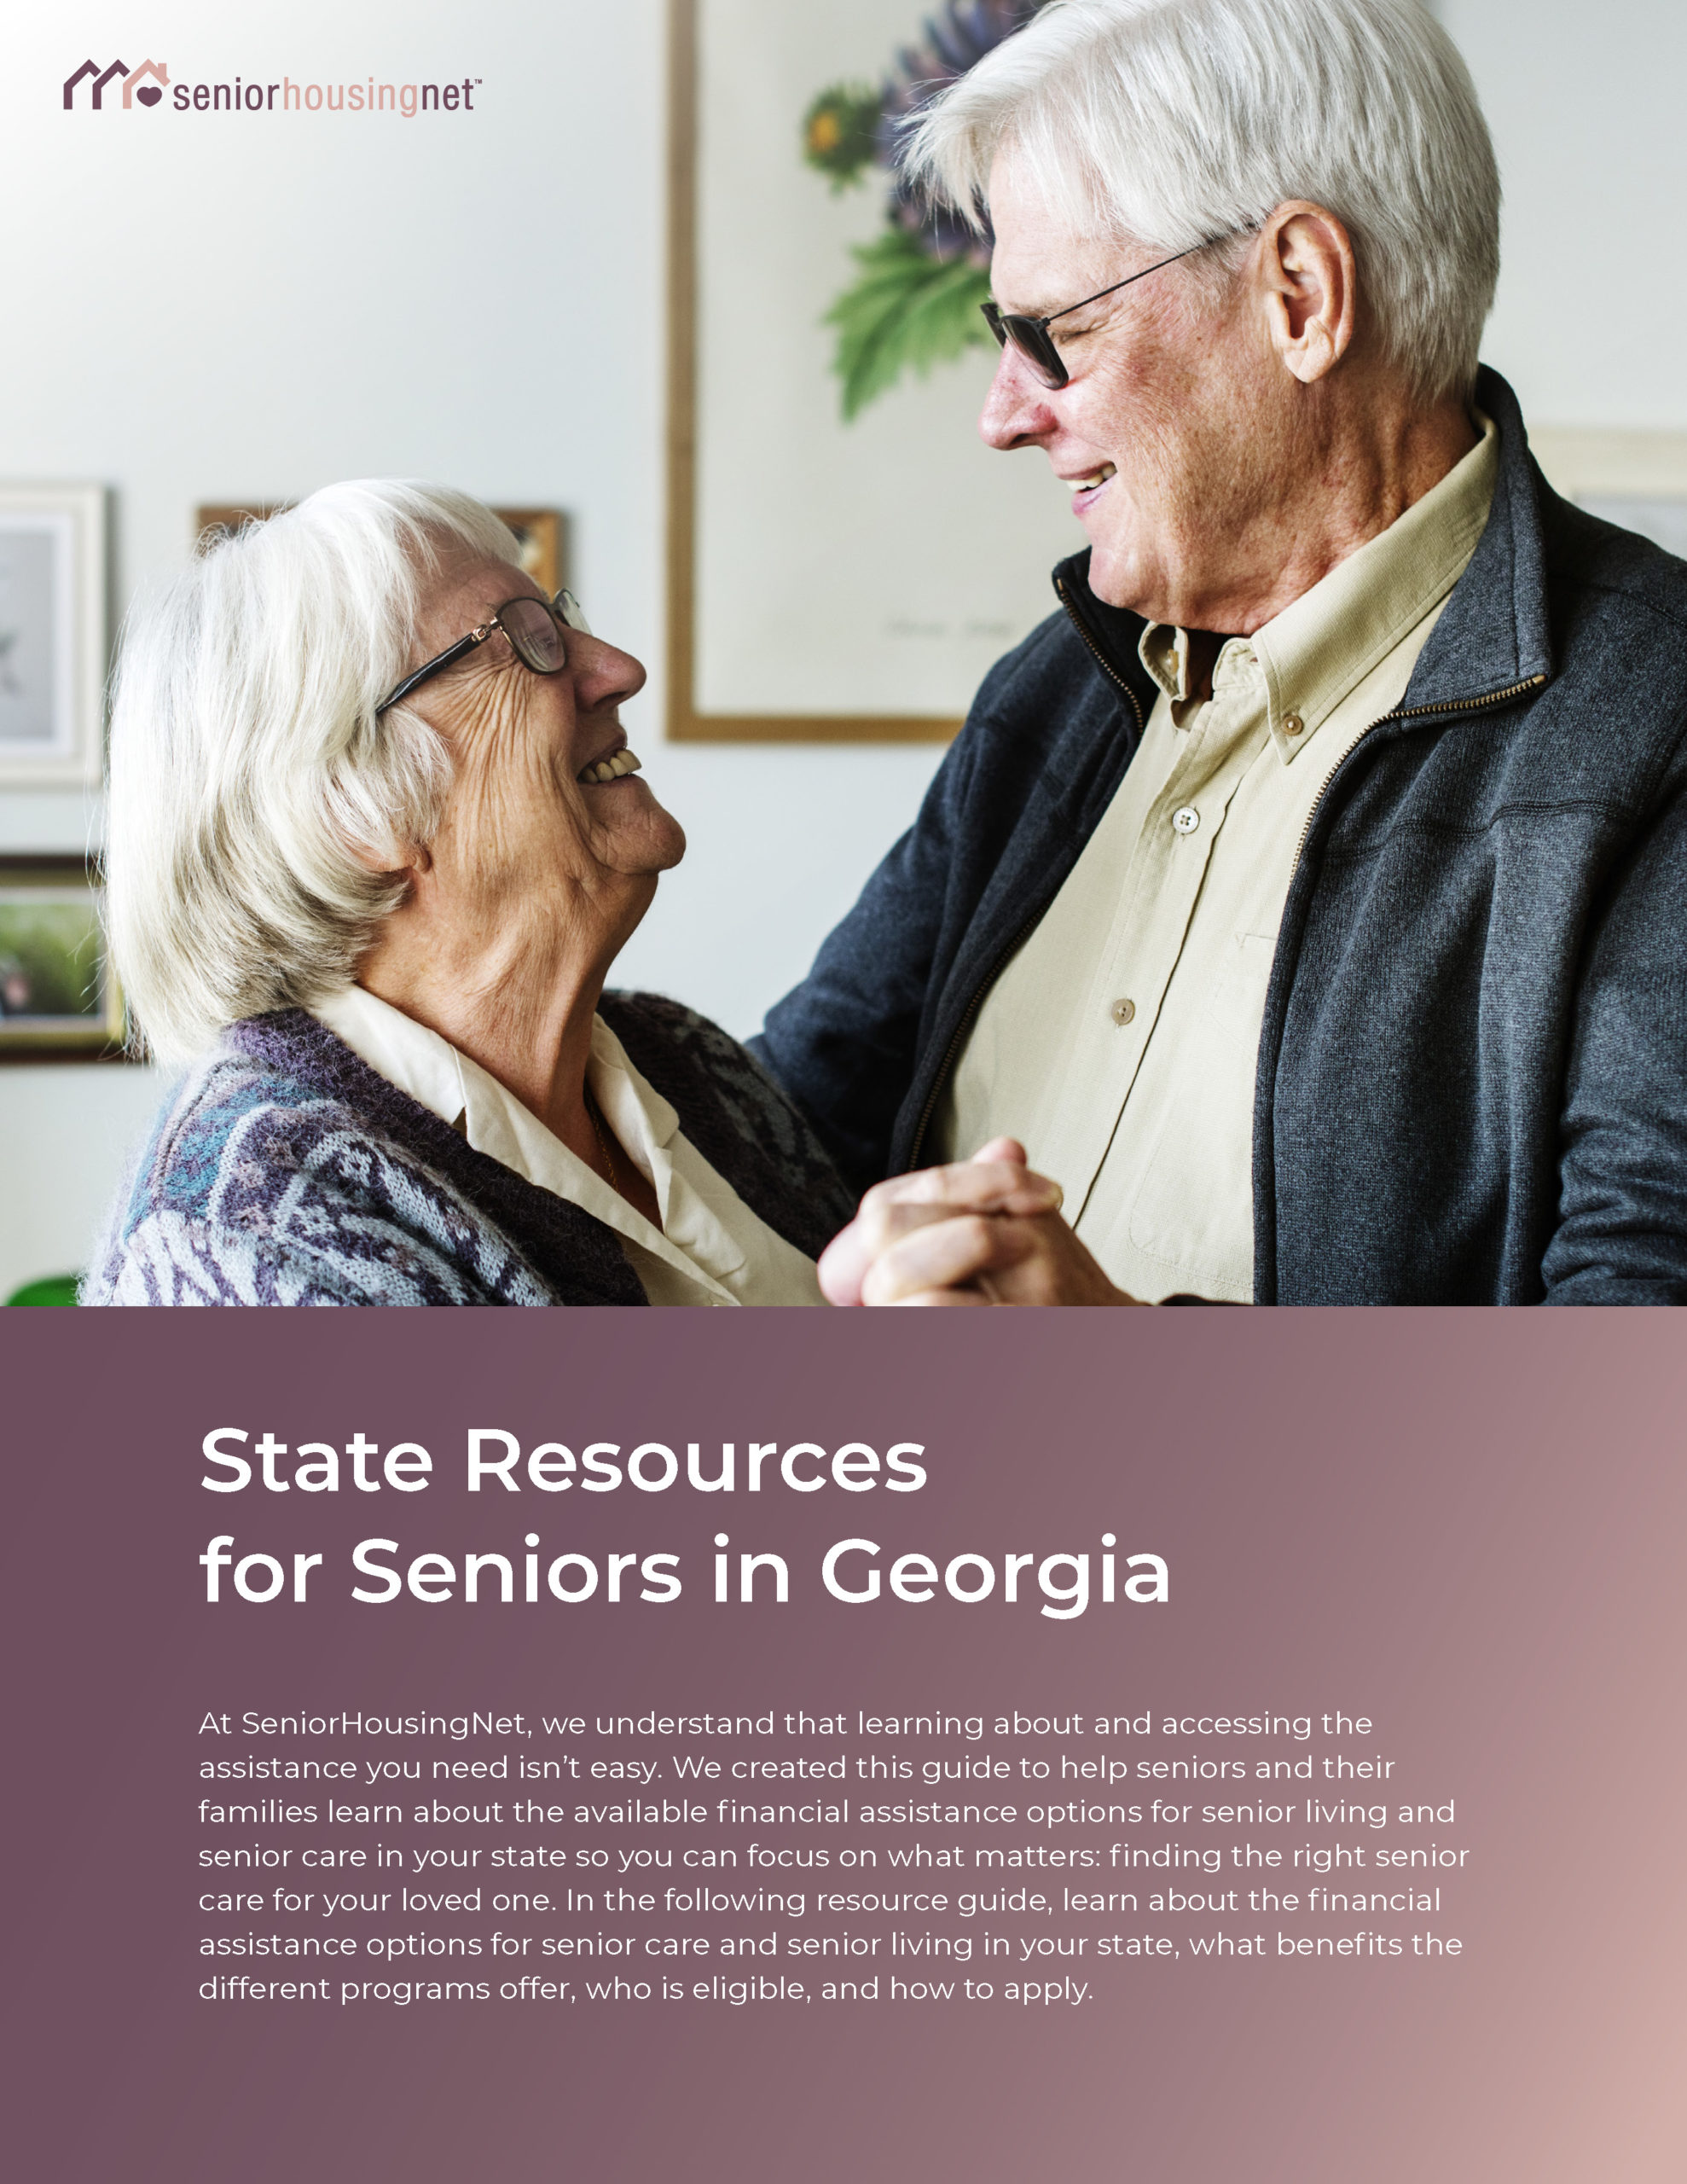 State Resources for Seniors in Georgia